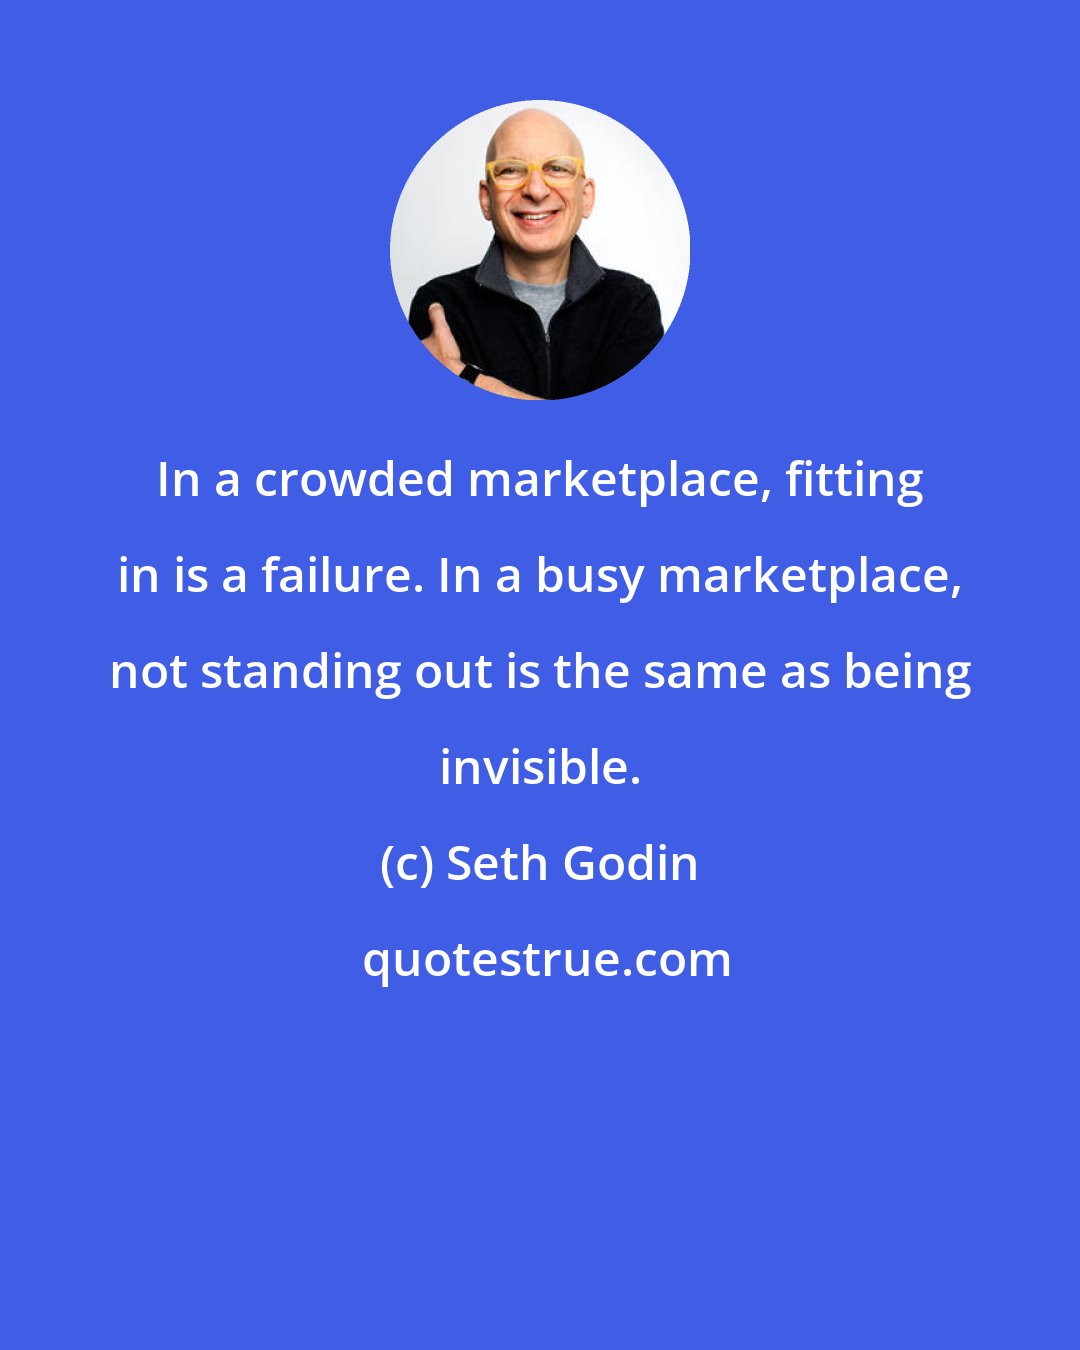 Seth Godin: In a crowded marketplace, fitting in is a failure. In a busy marketplace, not standing out is the same as being invisible.